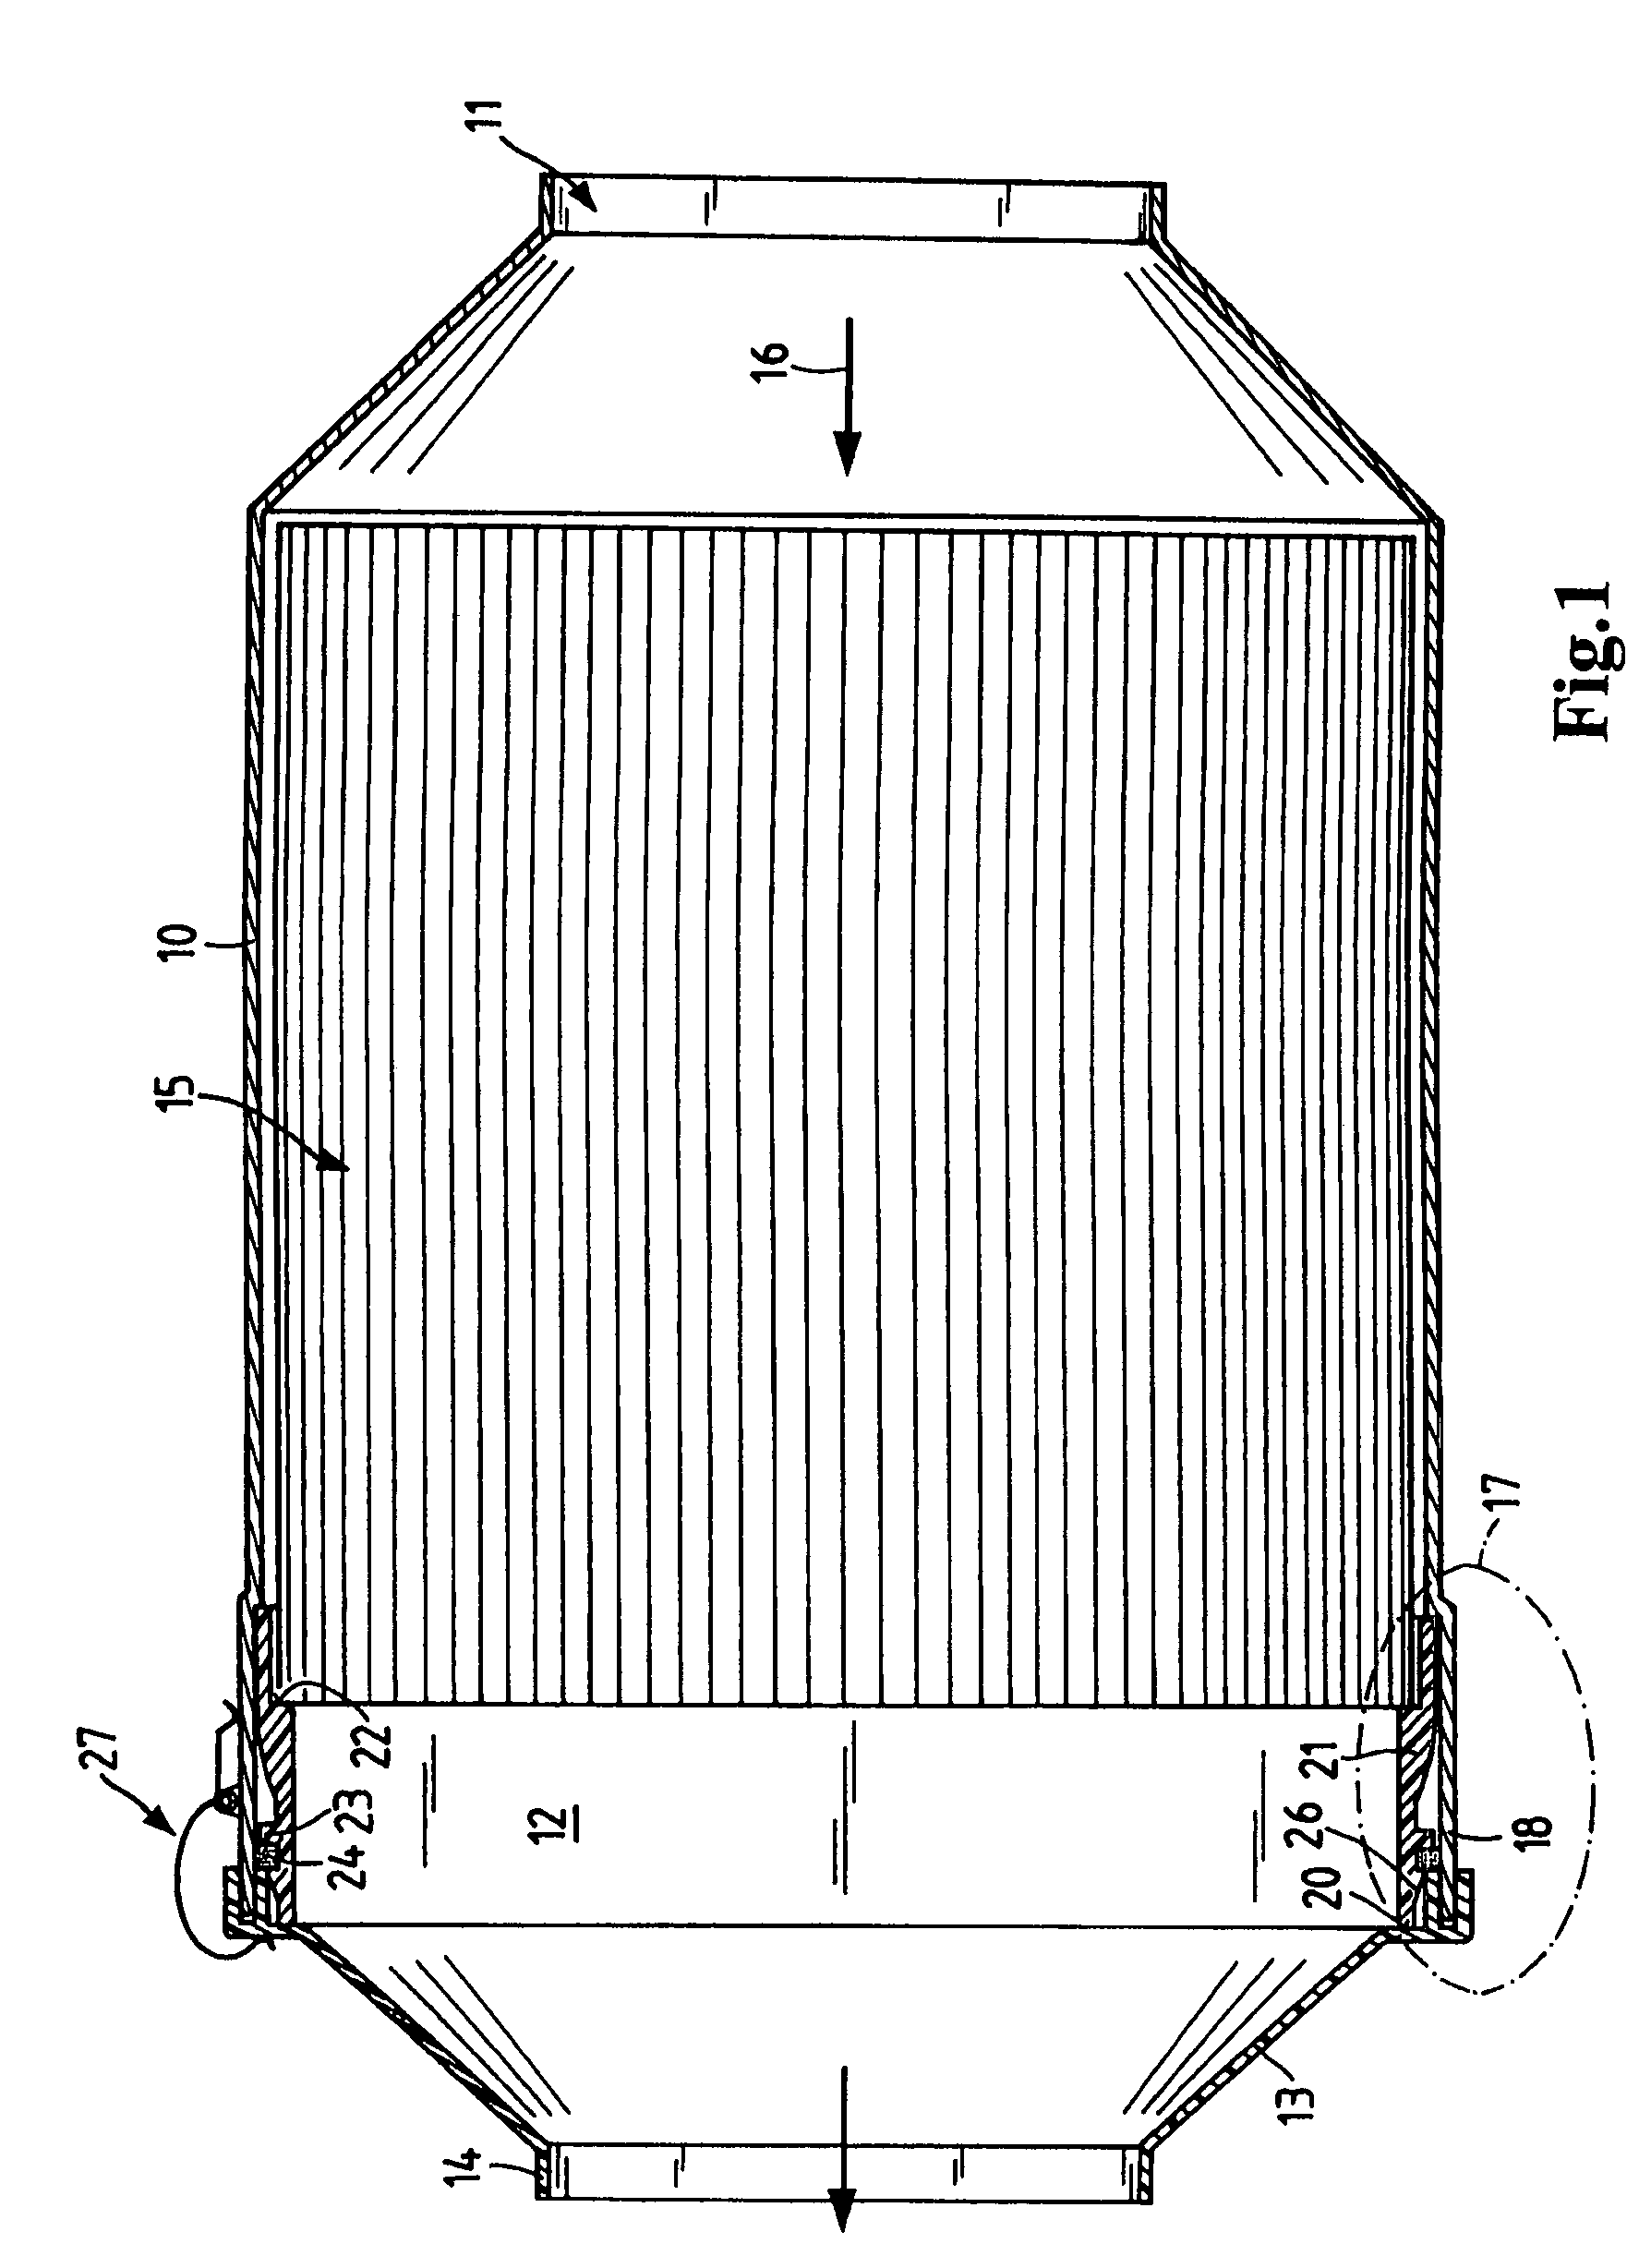 Compact filter comprising a square seal